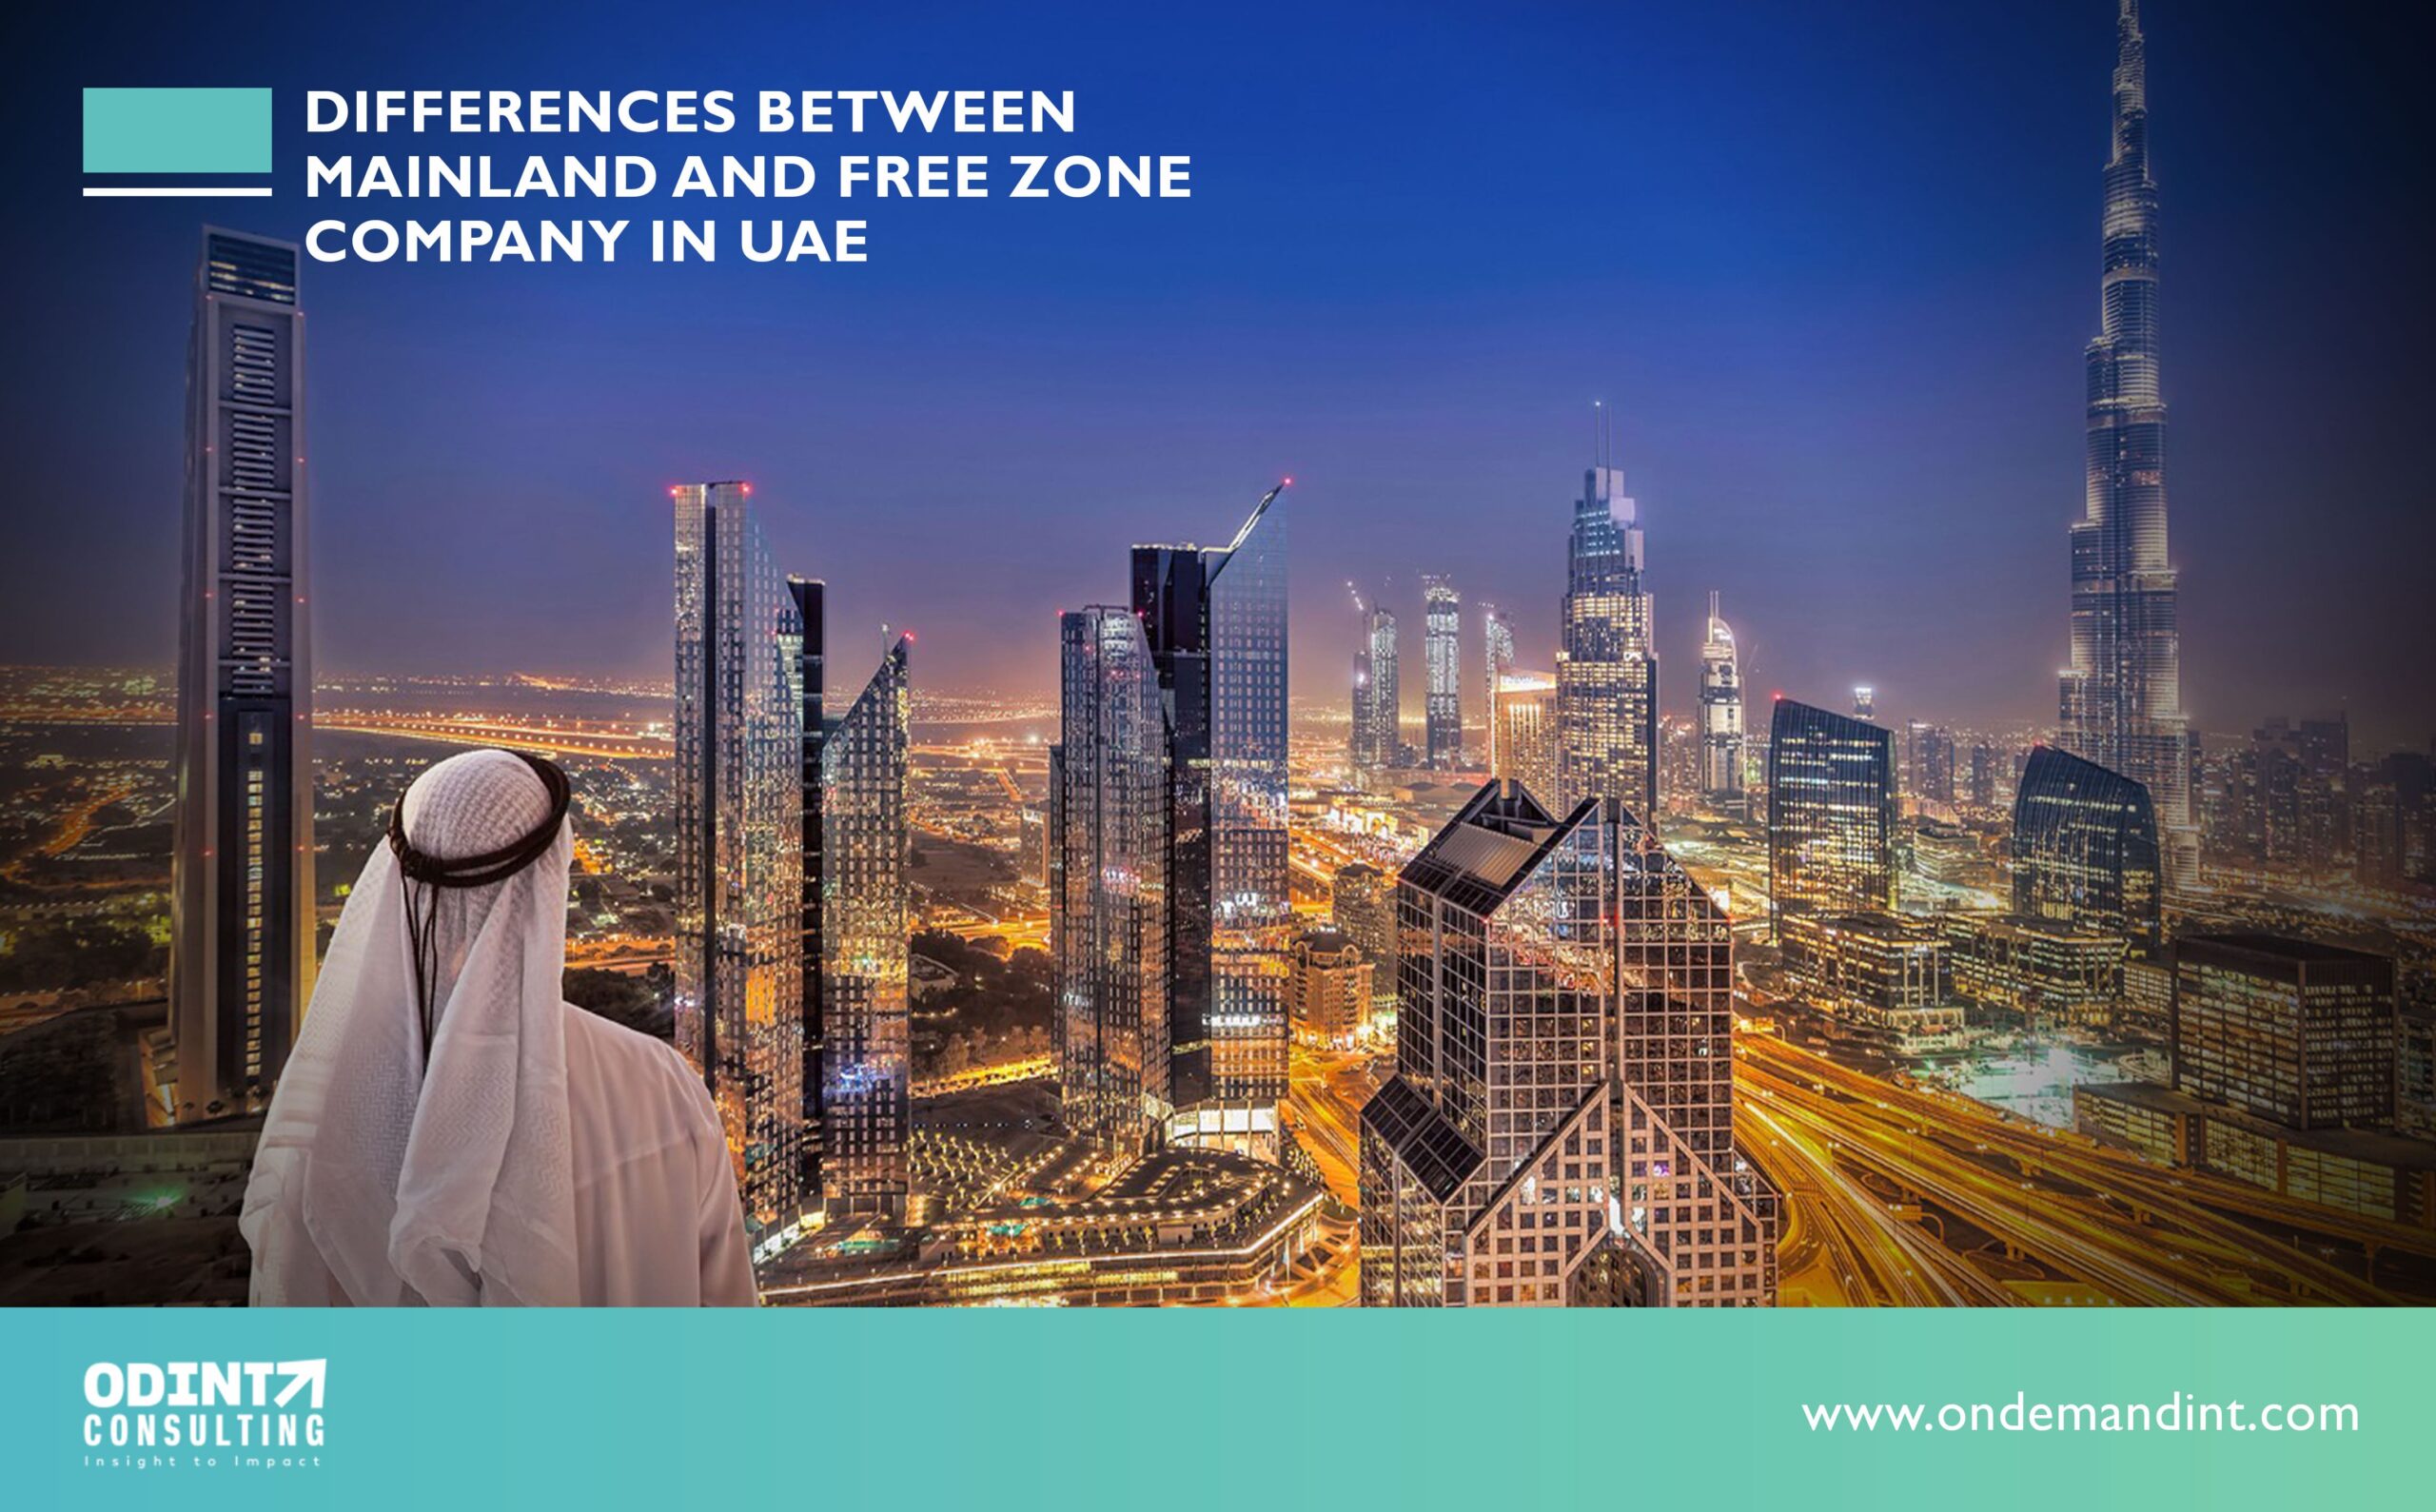 7 Differences between Mainland and Free Zone Company in UAE